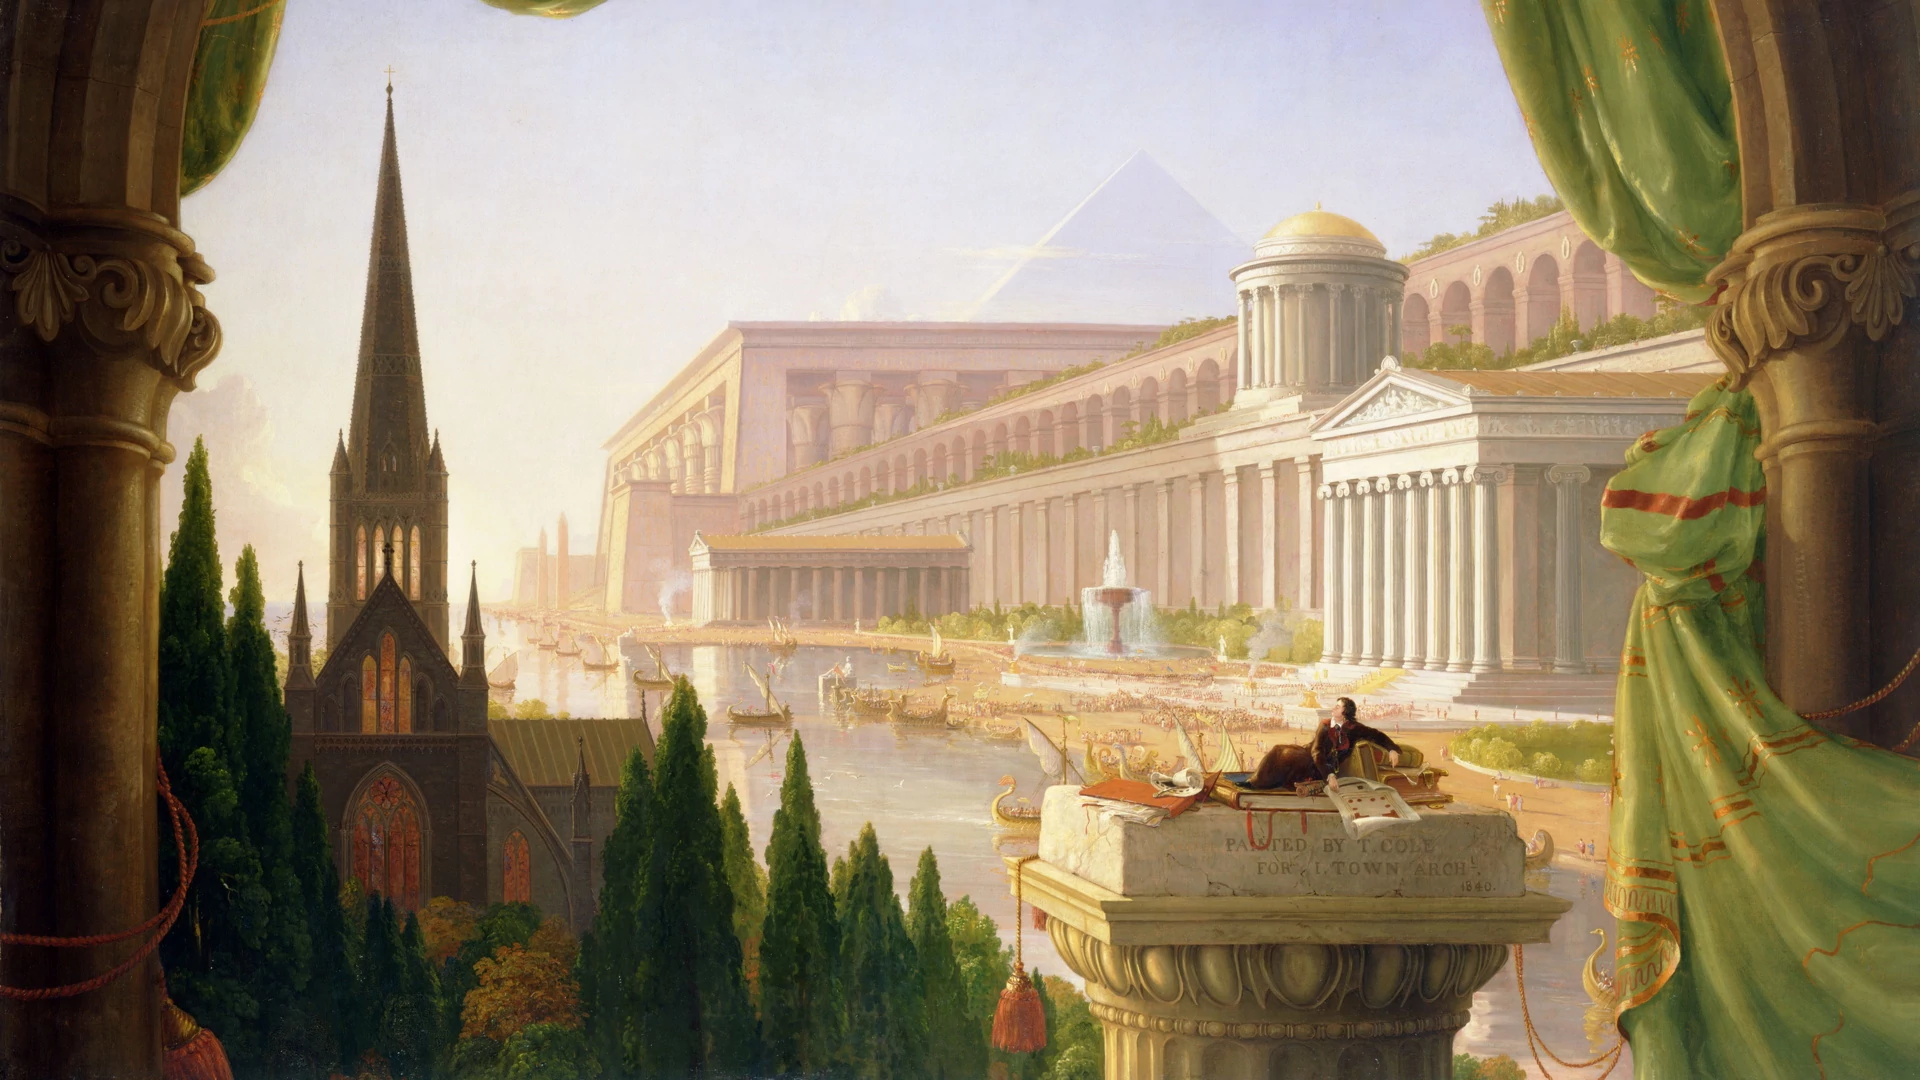 The Dream of the Architect, Thomas Cole